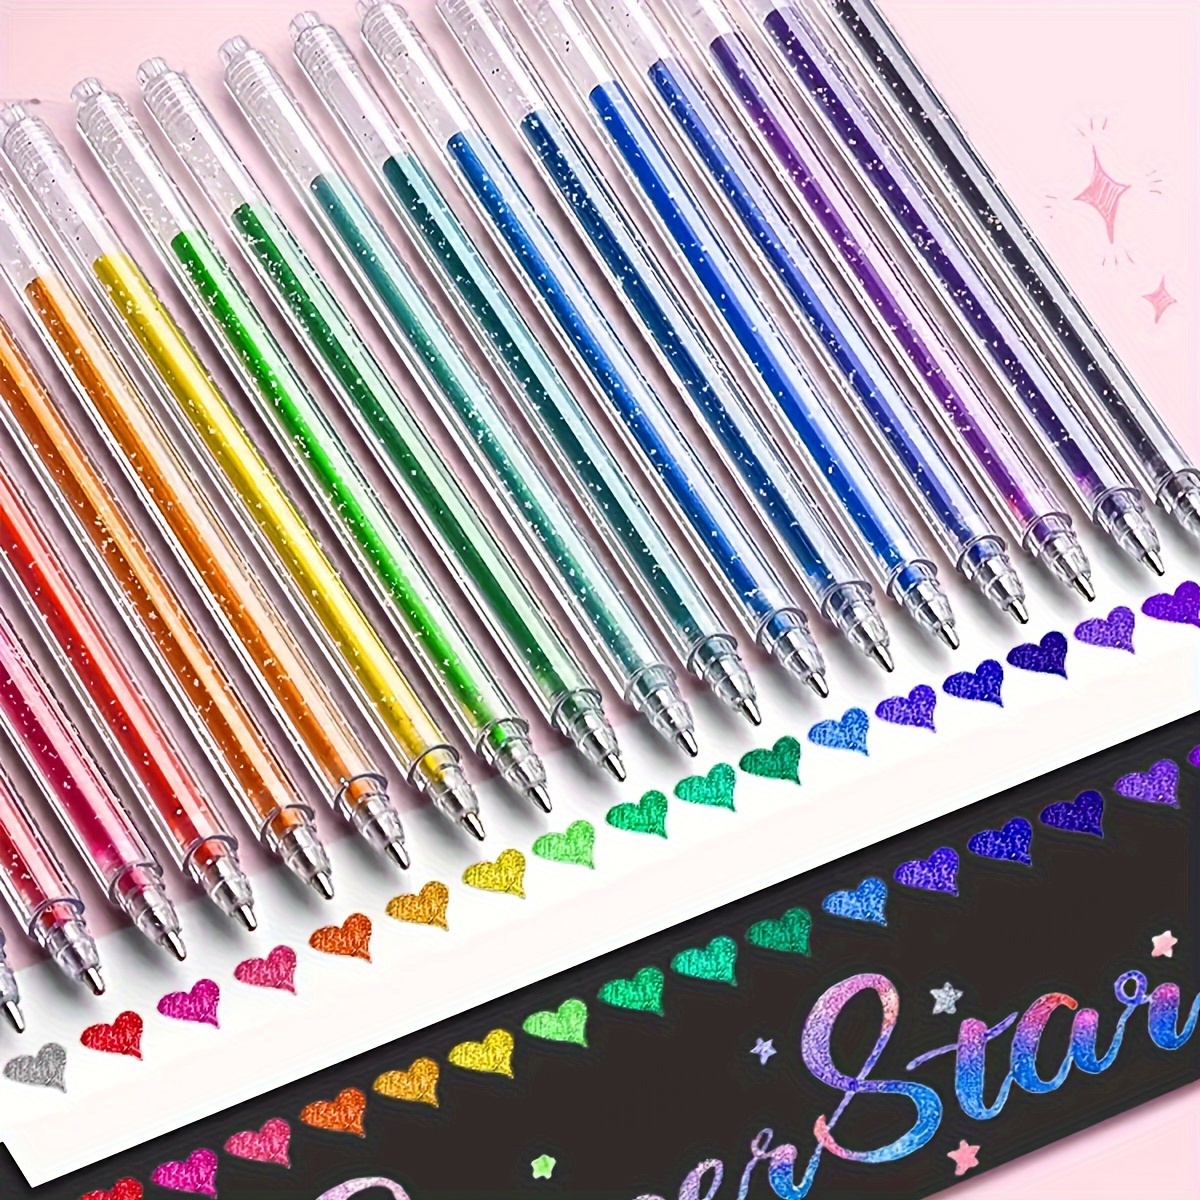 

Glitter Gel Pens Set, 1.0mm Medium Point, Water-resistant Plastic Rollerball Pens With Visible Ink Level - Ideal For Cardstock, Journals, Drawing, Marking, Coloring, Art Projects (8/12/18 Colors Pack)